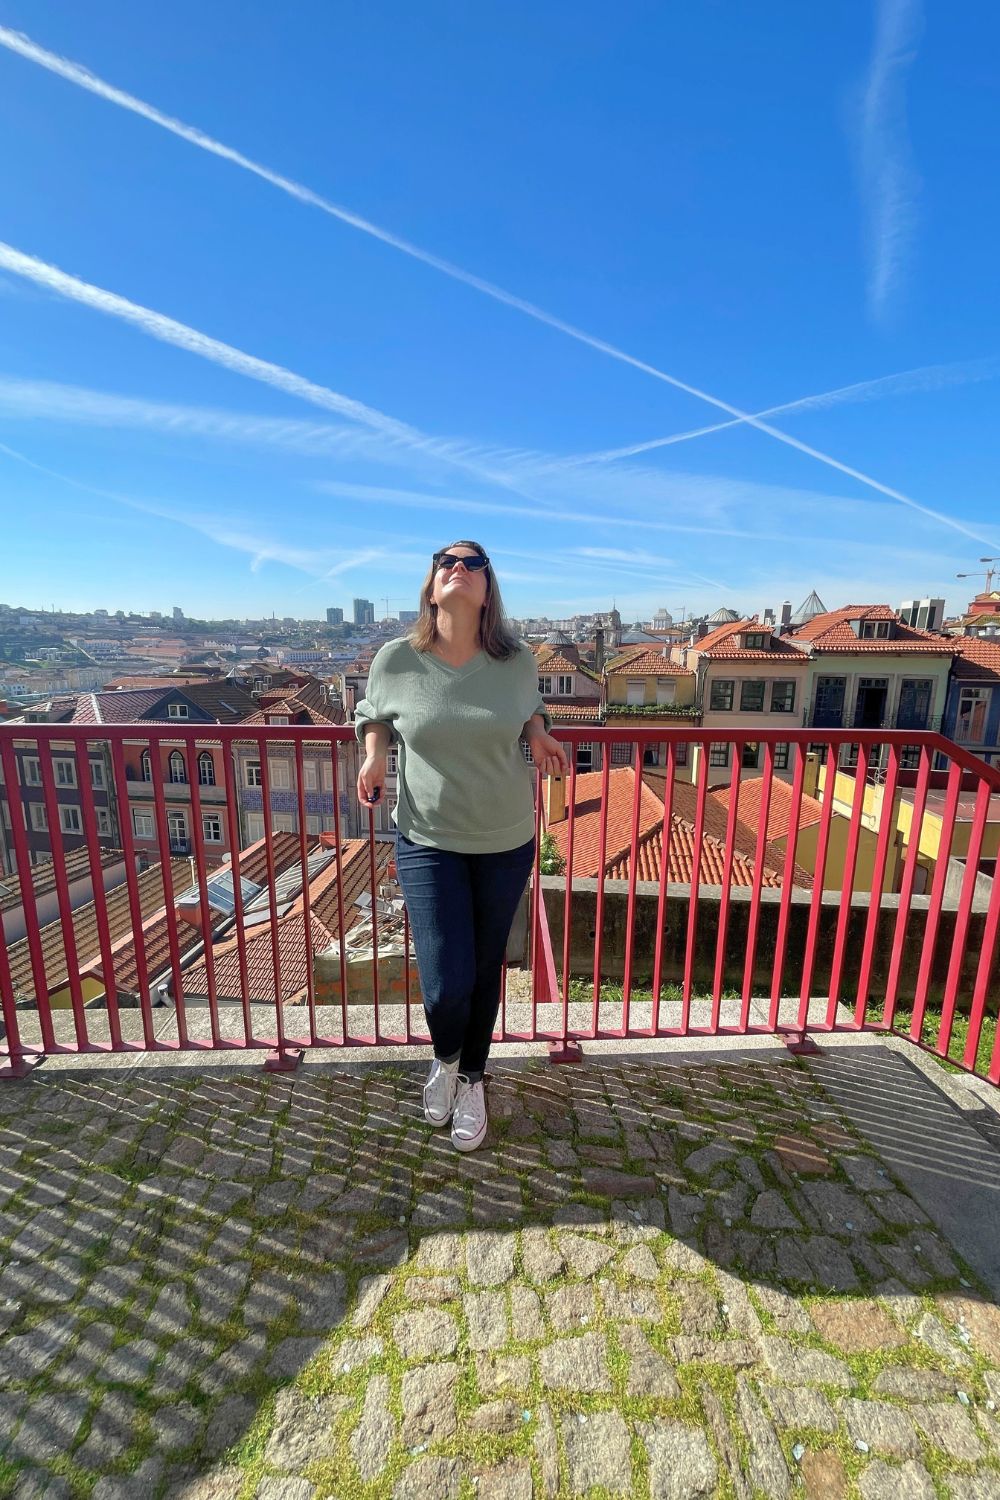 A woman standing on a viewpoint, smiling as she enjoys the expansive view of the red-roofed cityscape of Porto under a bright blue sky with airplane contrails